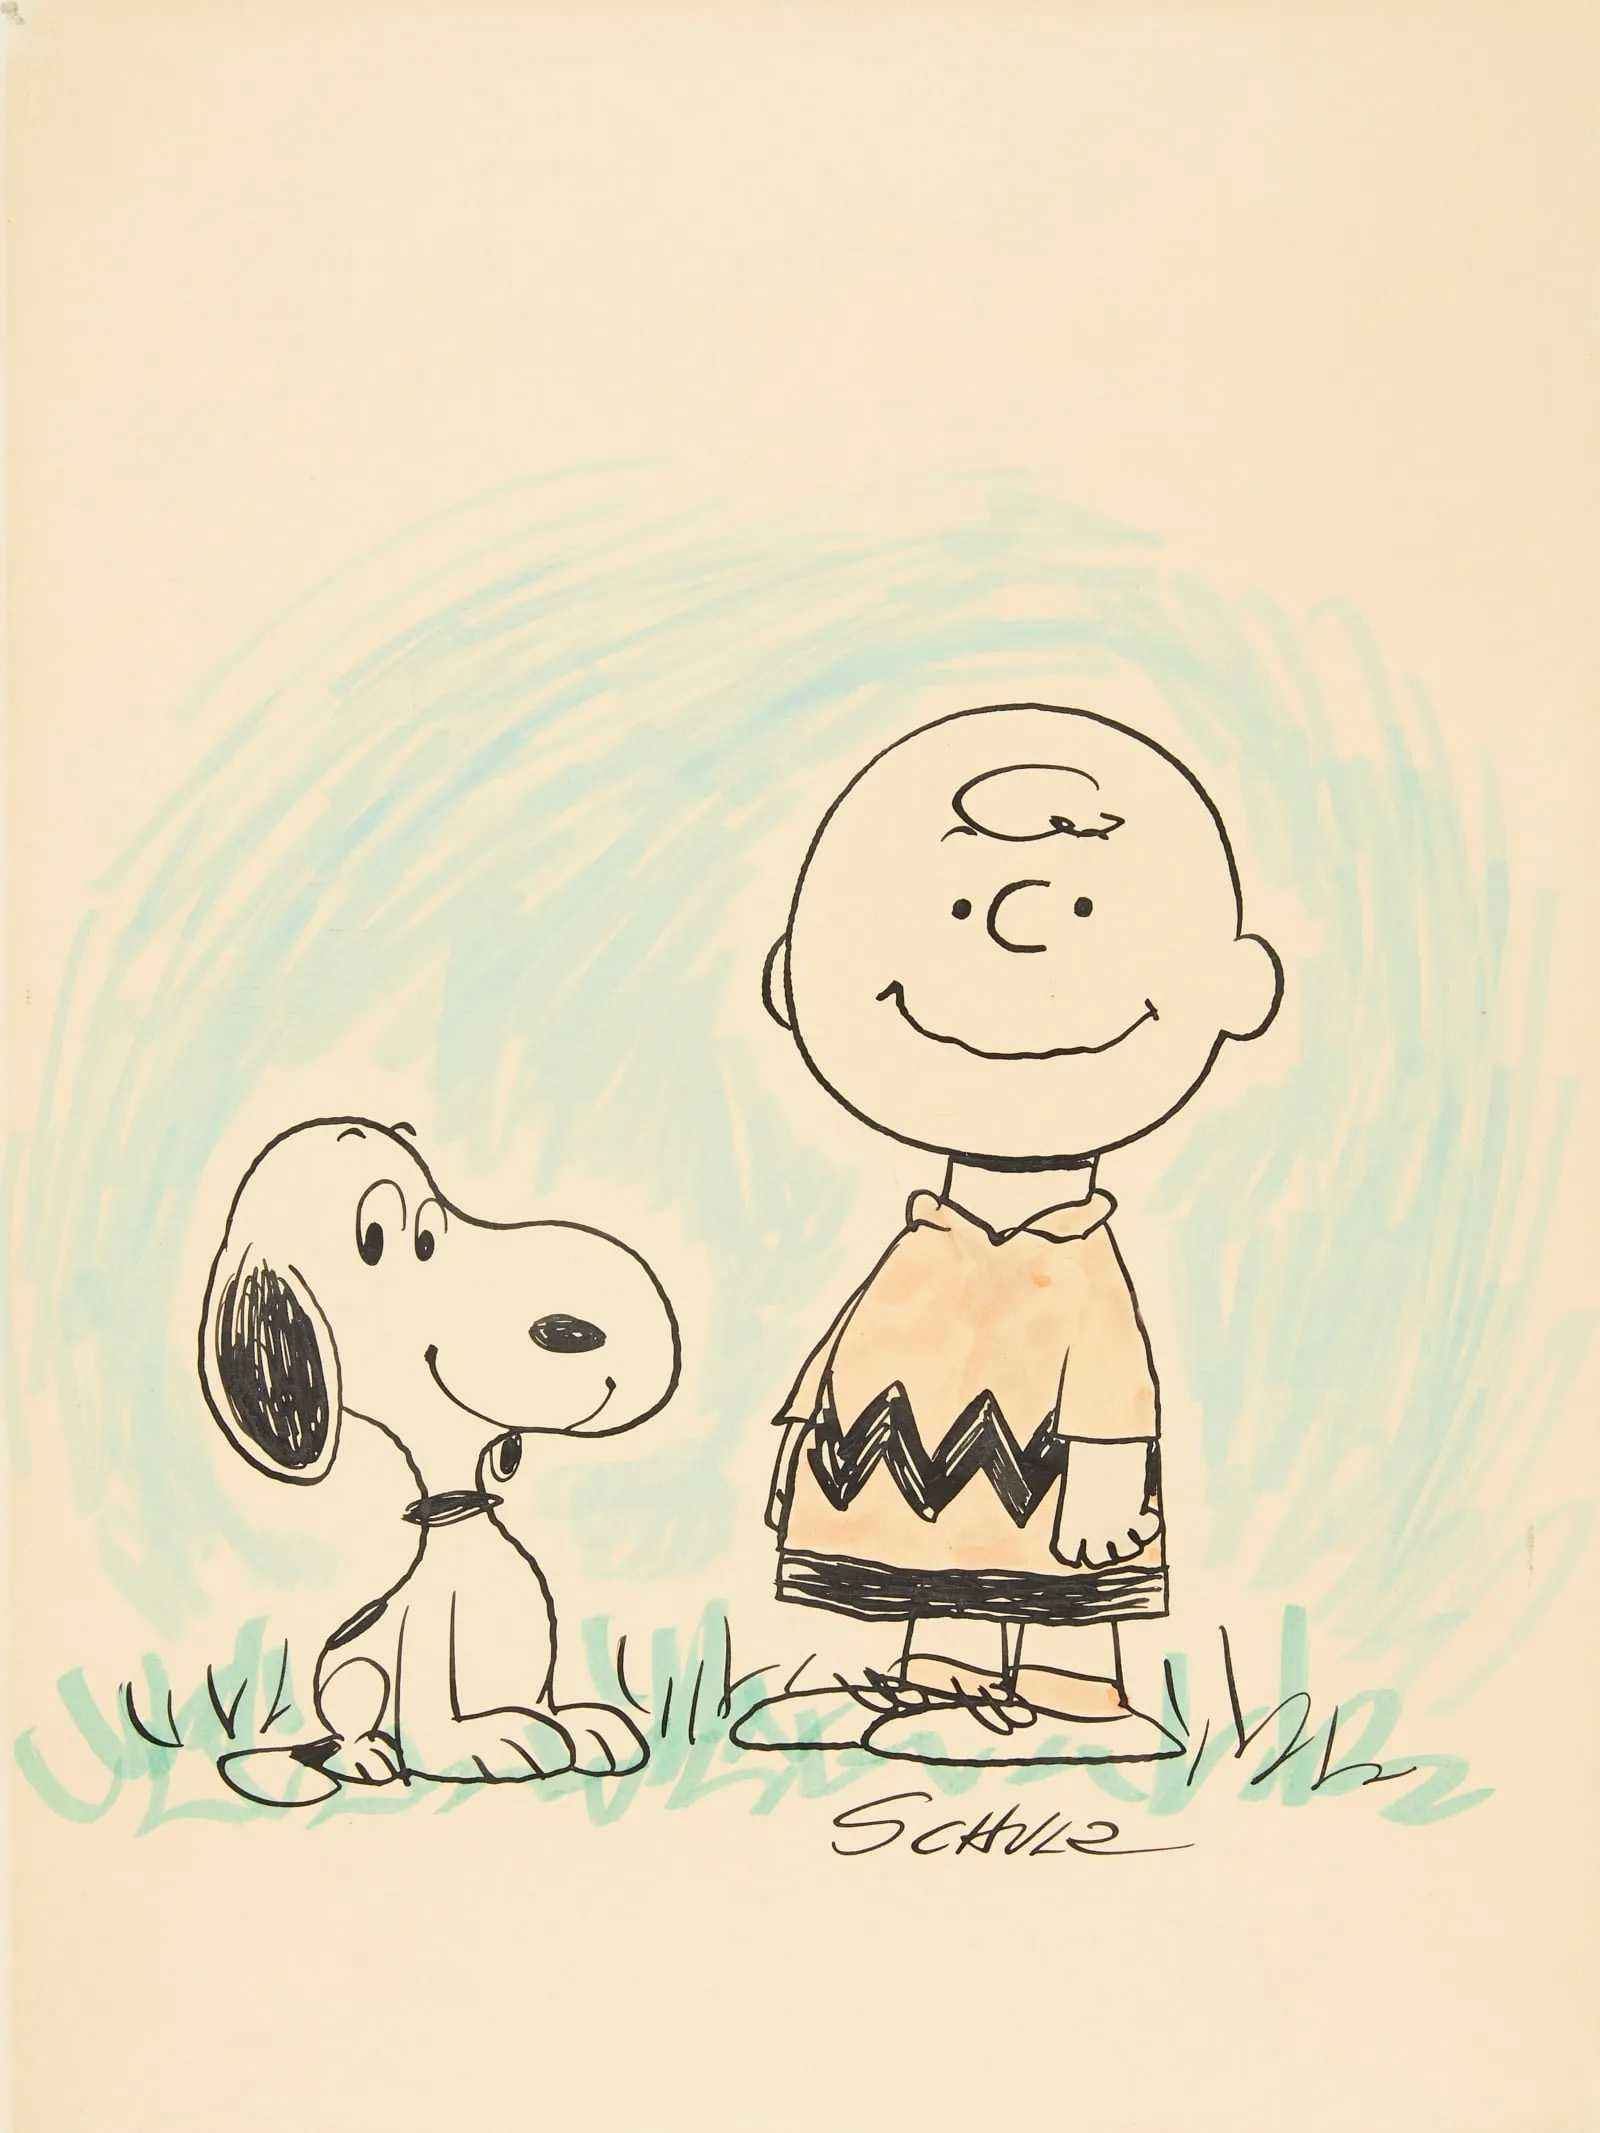 Charles Schulz Drawing of Charlie Brown and Snoopy, estimated at $1,000-$2,000 at Revere.